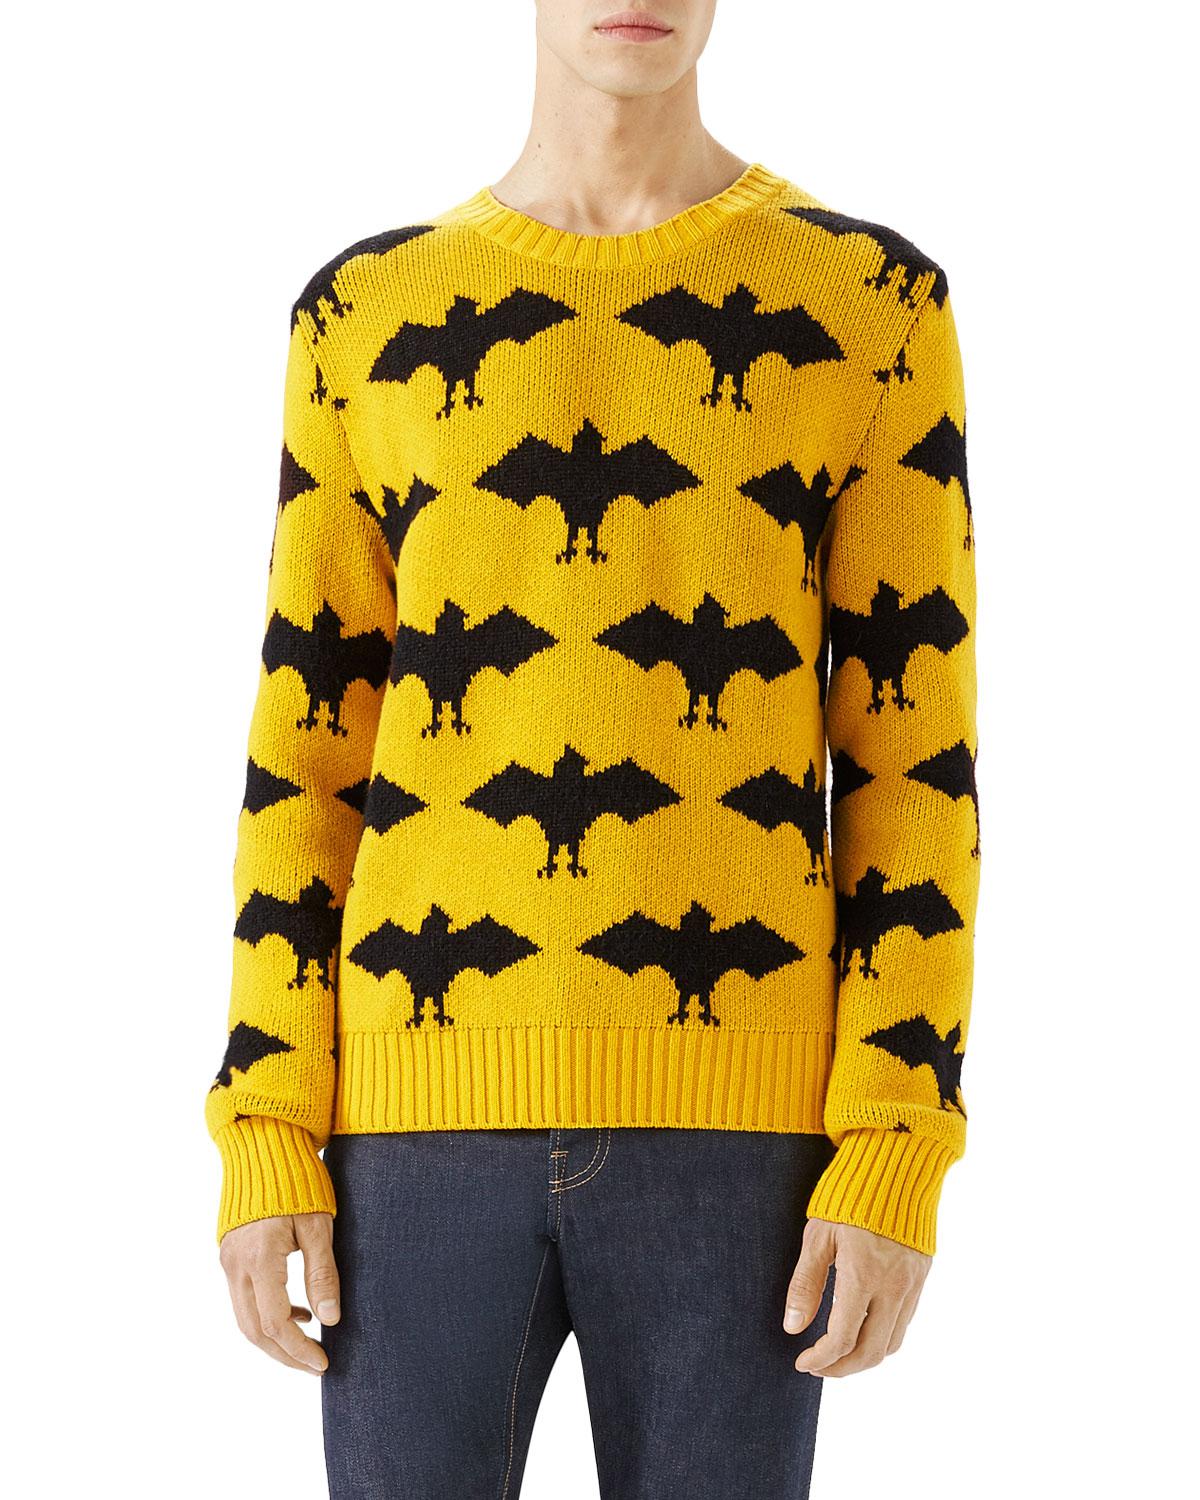 Gucci Bat Crewneck Sweater in Yellow for Men | Lyst